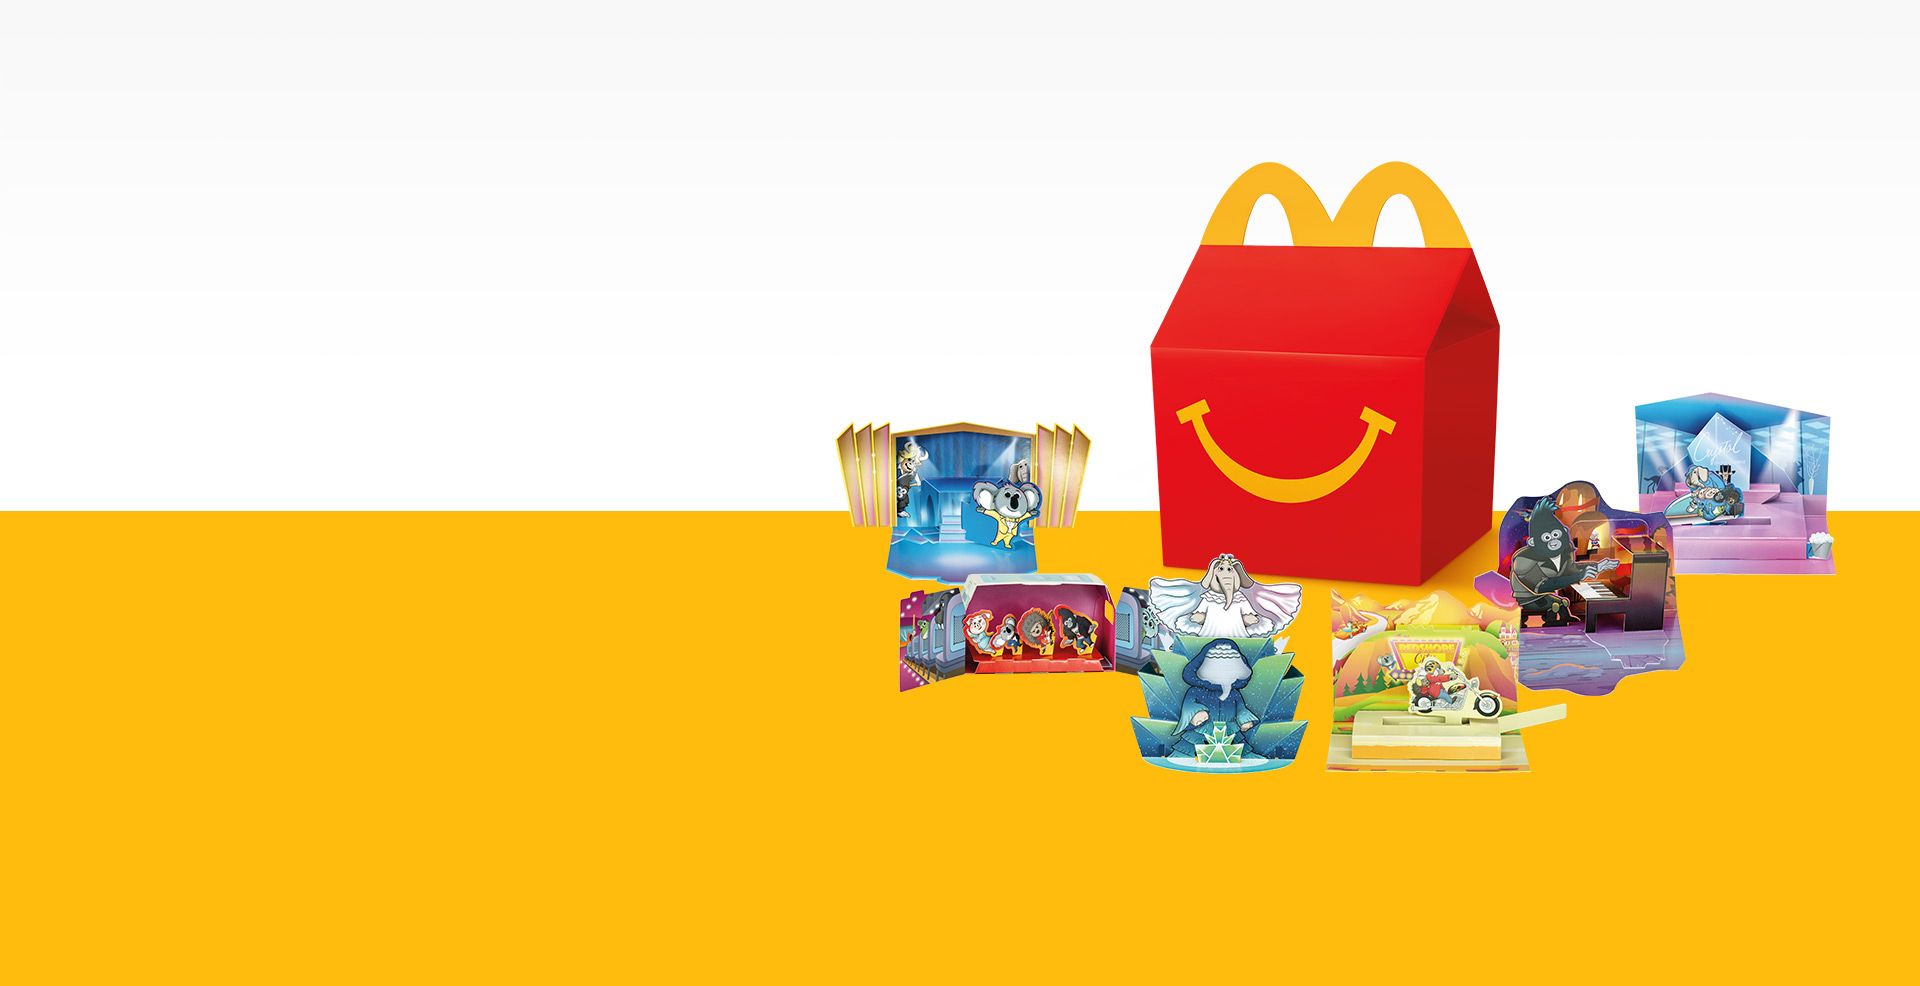 HappyMeal background